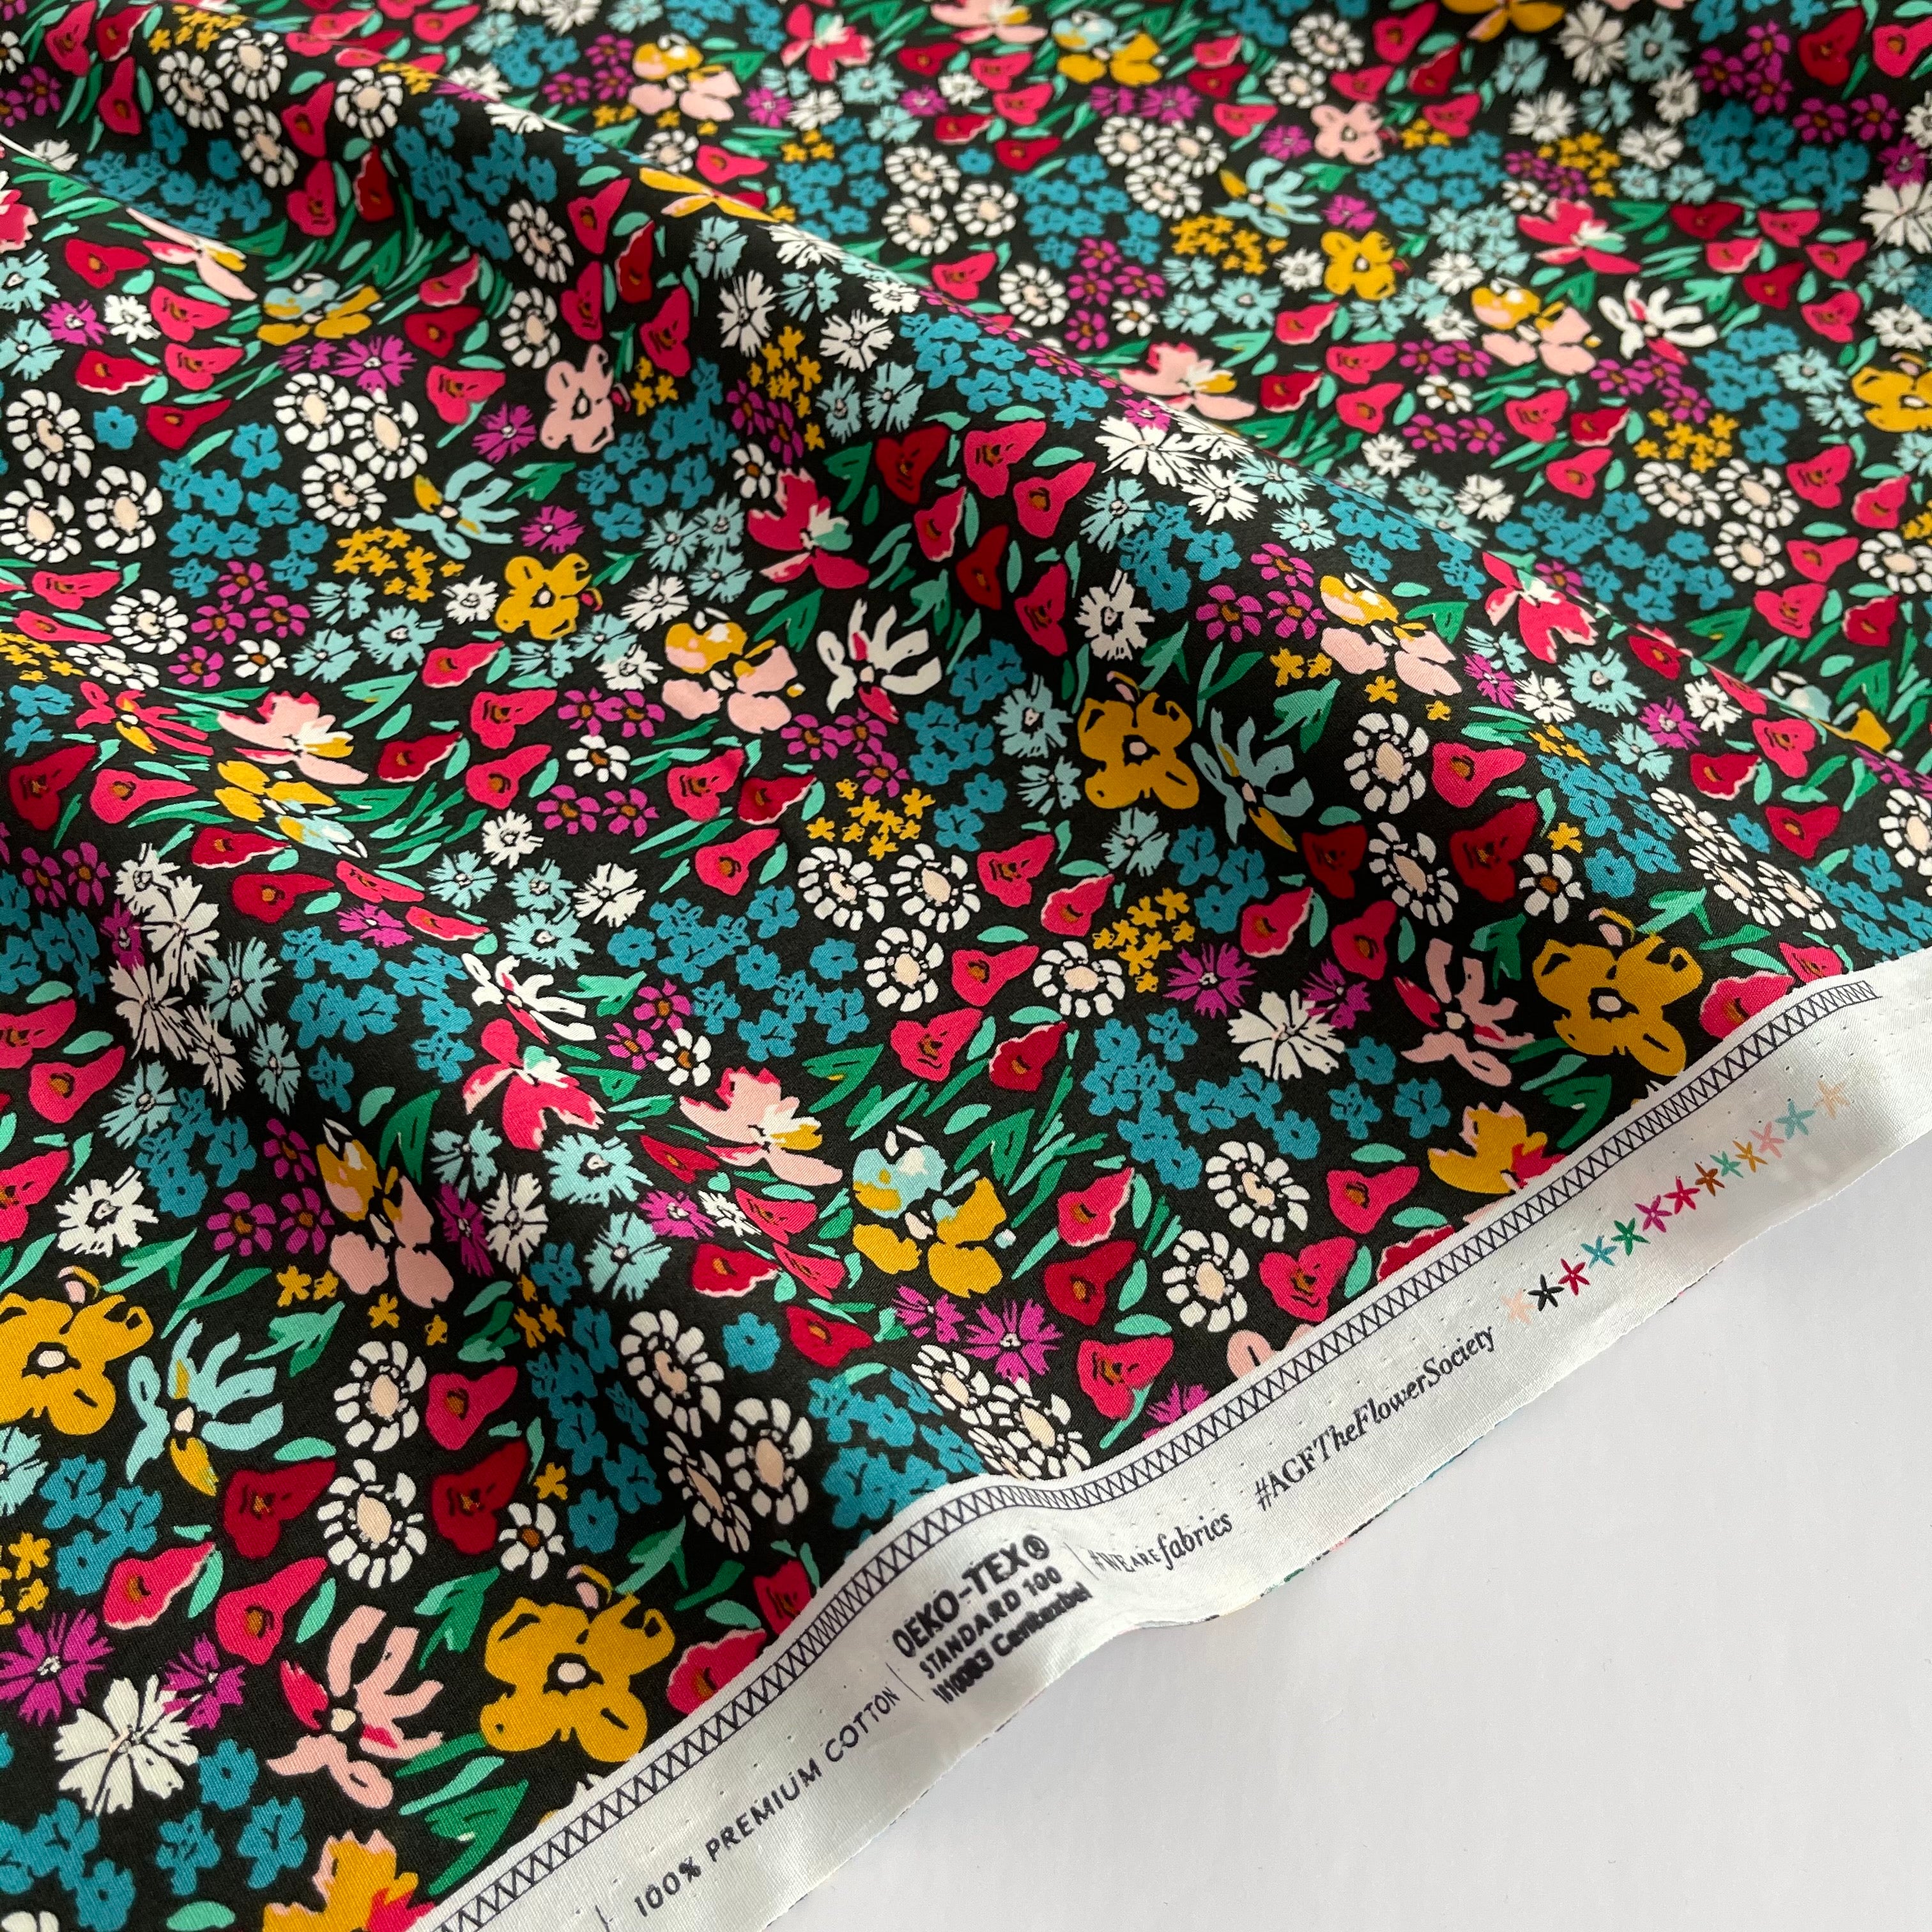 Art Gallery Fabrics - Bloomkind Meadow Cotton from Flower Society